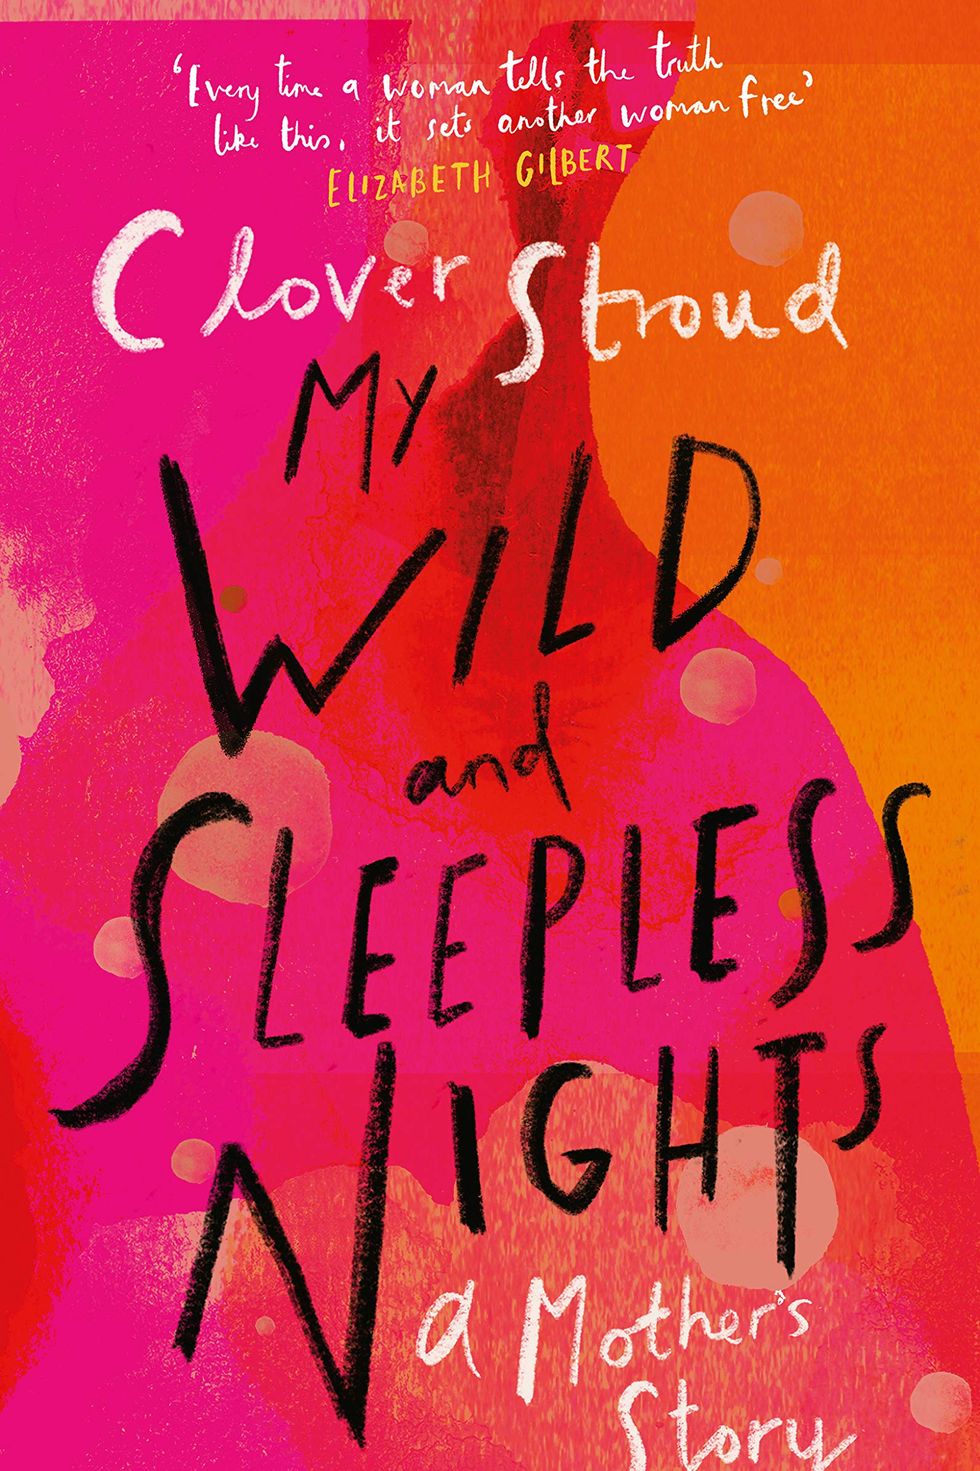 My Wild and Sleepless Nights by Clover Stroud